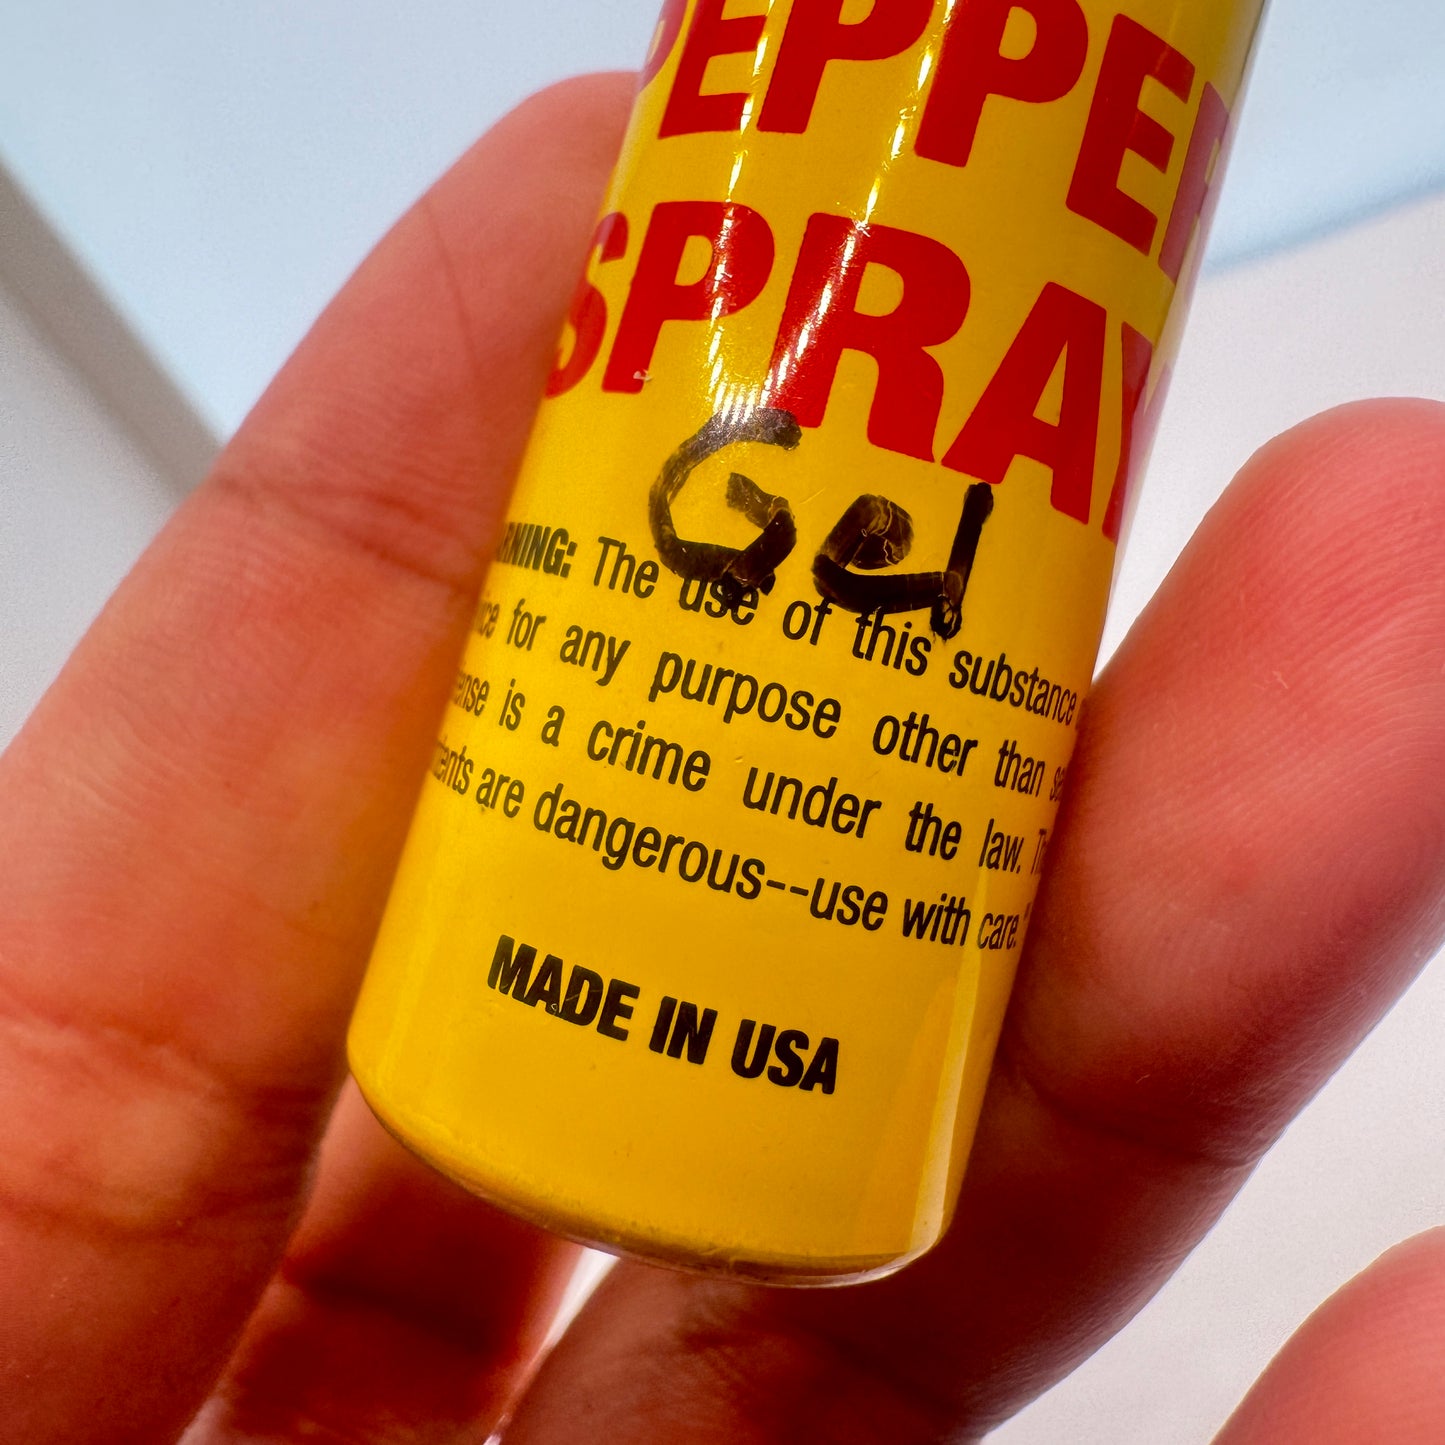 Protect yourself with this brand new Pepper Spray, proudly made in the USA. Its locked side feature allows you to easily move it to ready spray, ensuring quick and easy access during emergency situations. The spray is highly effective and delivers a poten